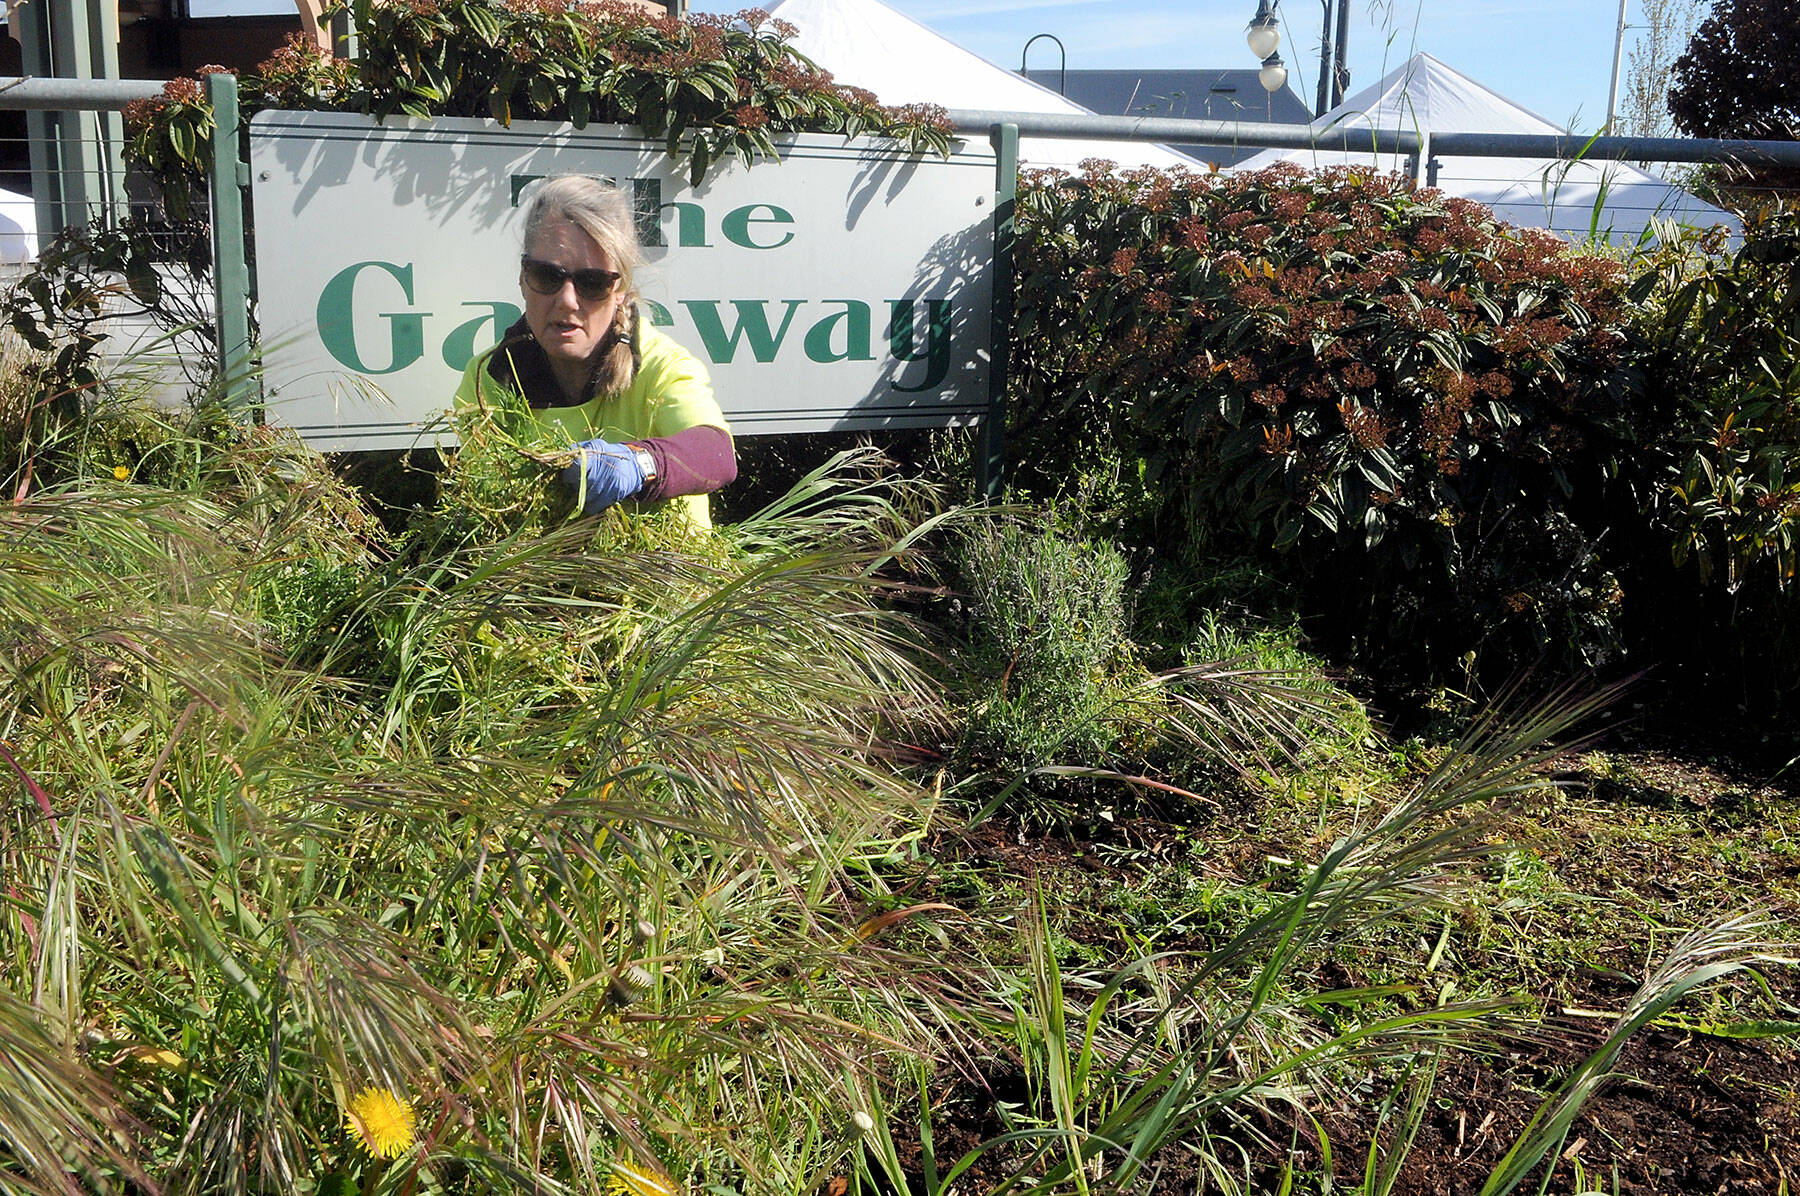 Sharon Prosser, a board member for the Port Angeles Farmers Market, pulls weeds from the welcome sign at The Gateway transit center in downtown Port Angeles during Saturday’s Big Spring Spruce Up. The second annual event saw teams cleaning around the downtown area in an activity hosted by ElevatePA, the Port Angeles Regional Chamber of Commerce and the city of Port Angeles. (Keith Thorpe/Peninsula Daily News)